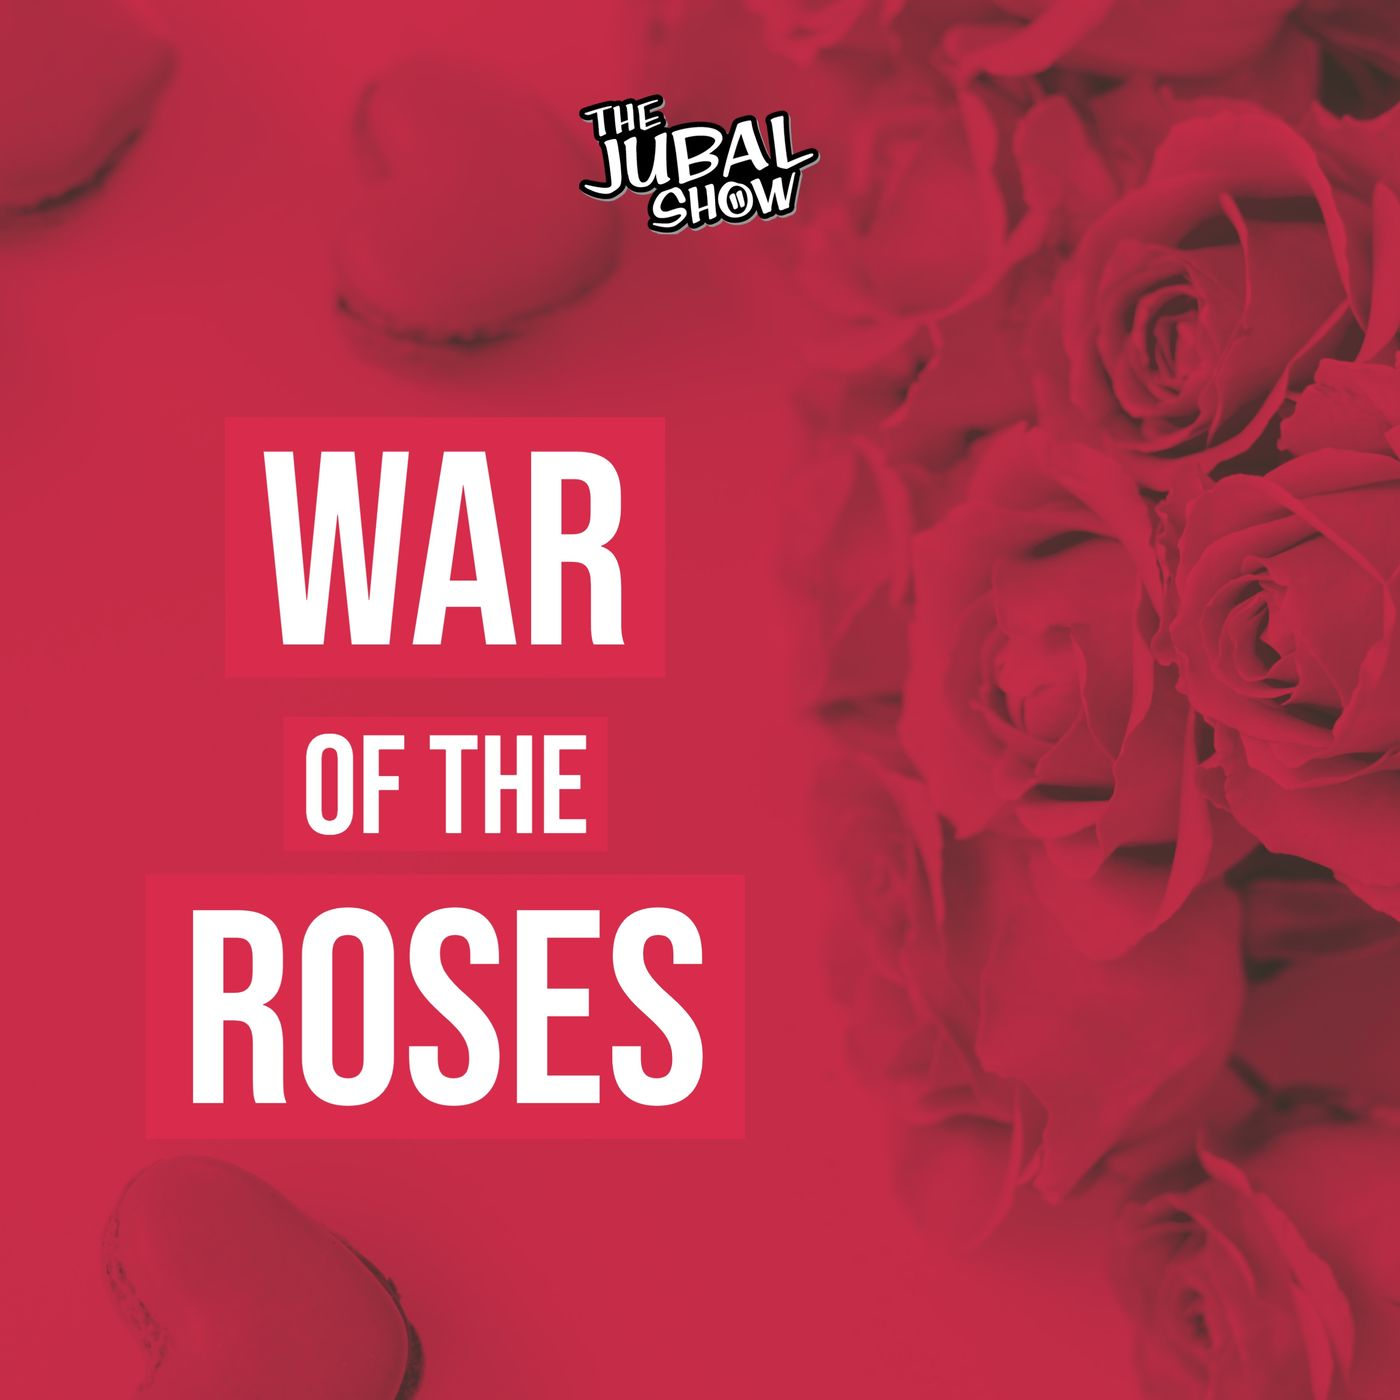 This is one of the most surprising War of the Roses ever!